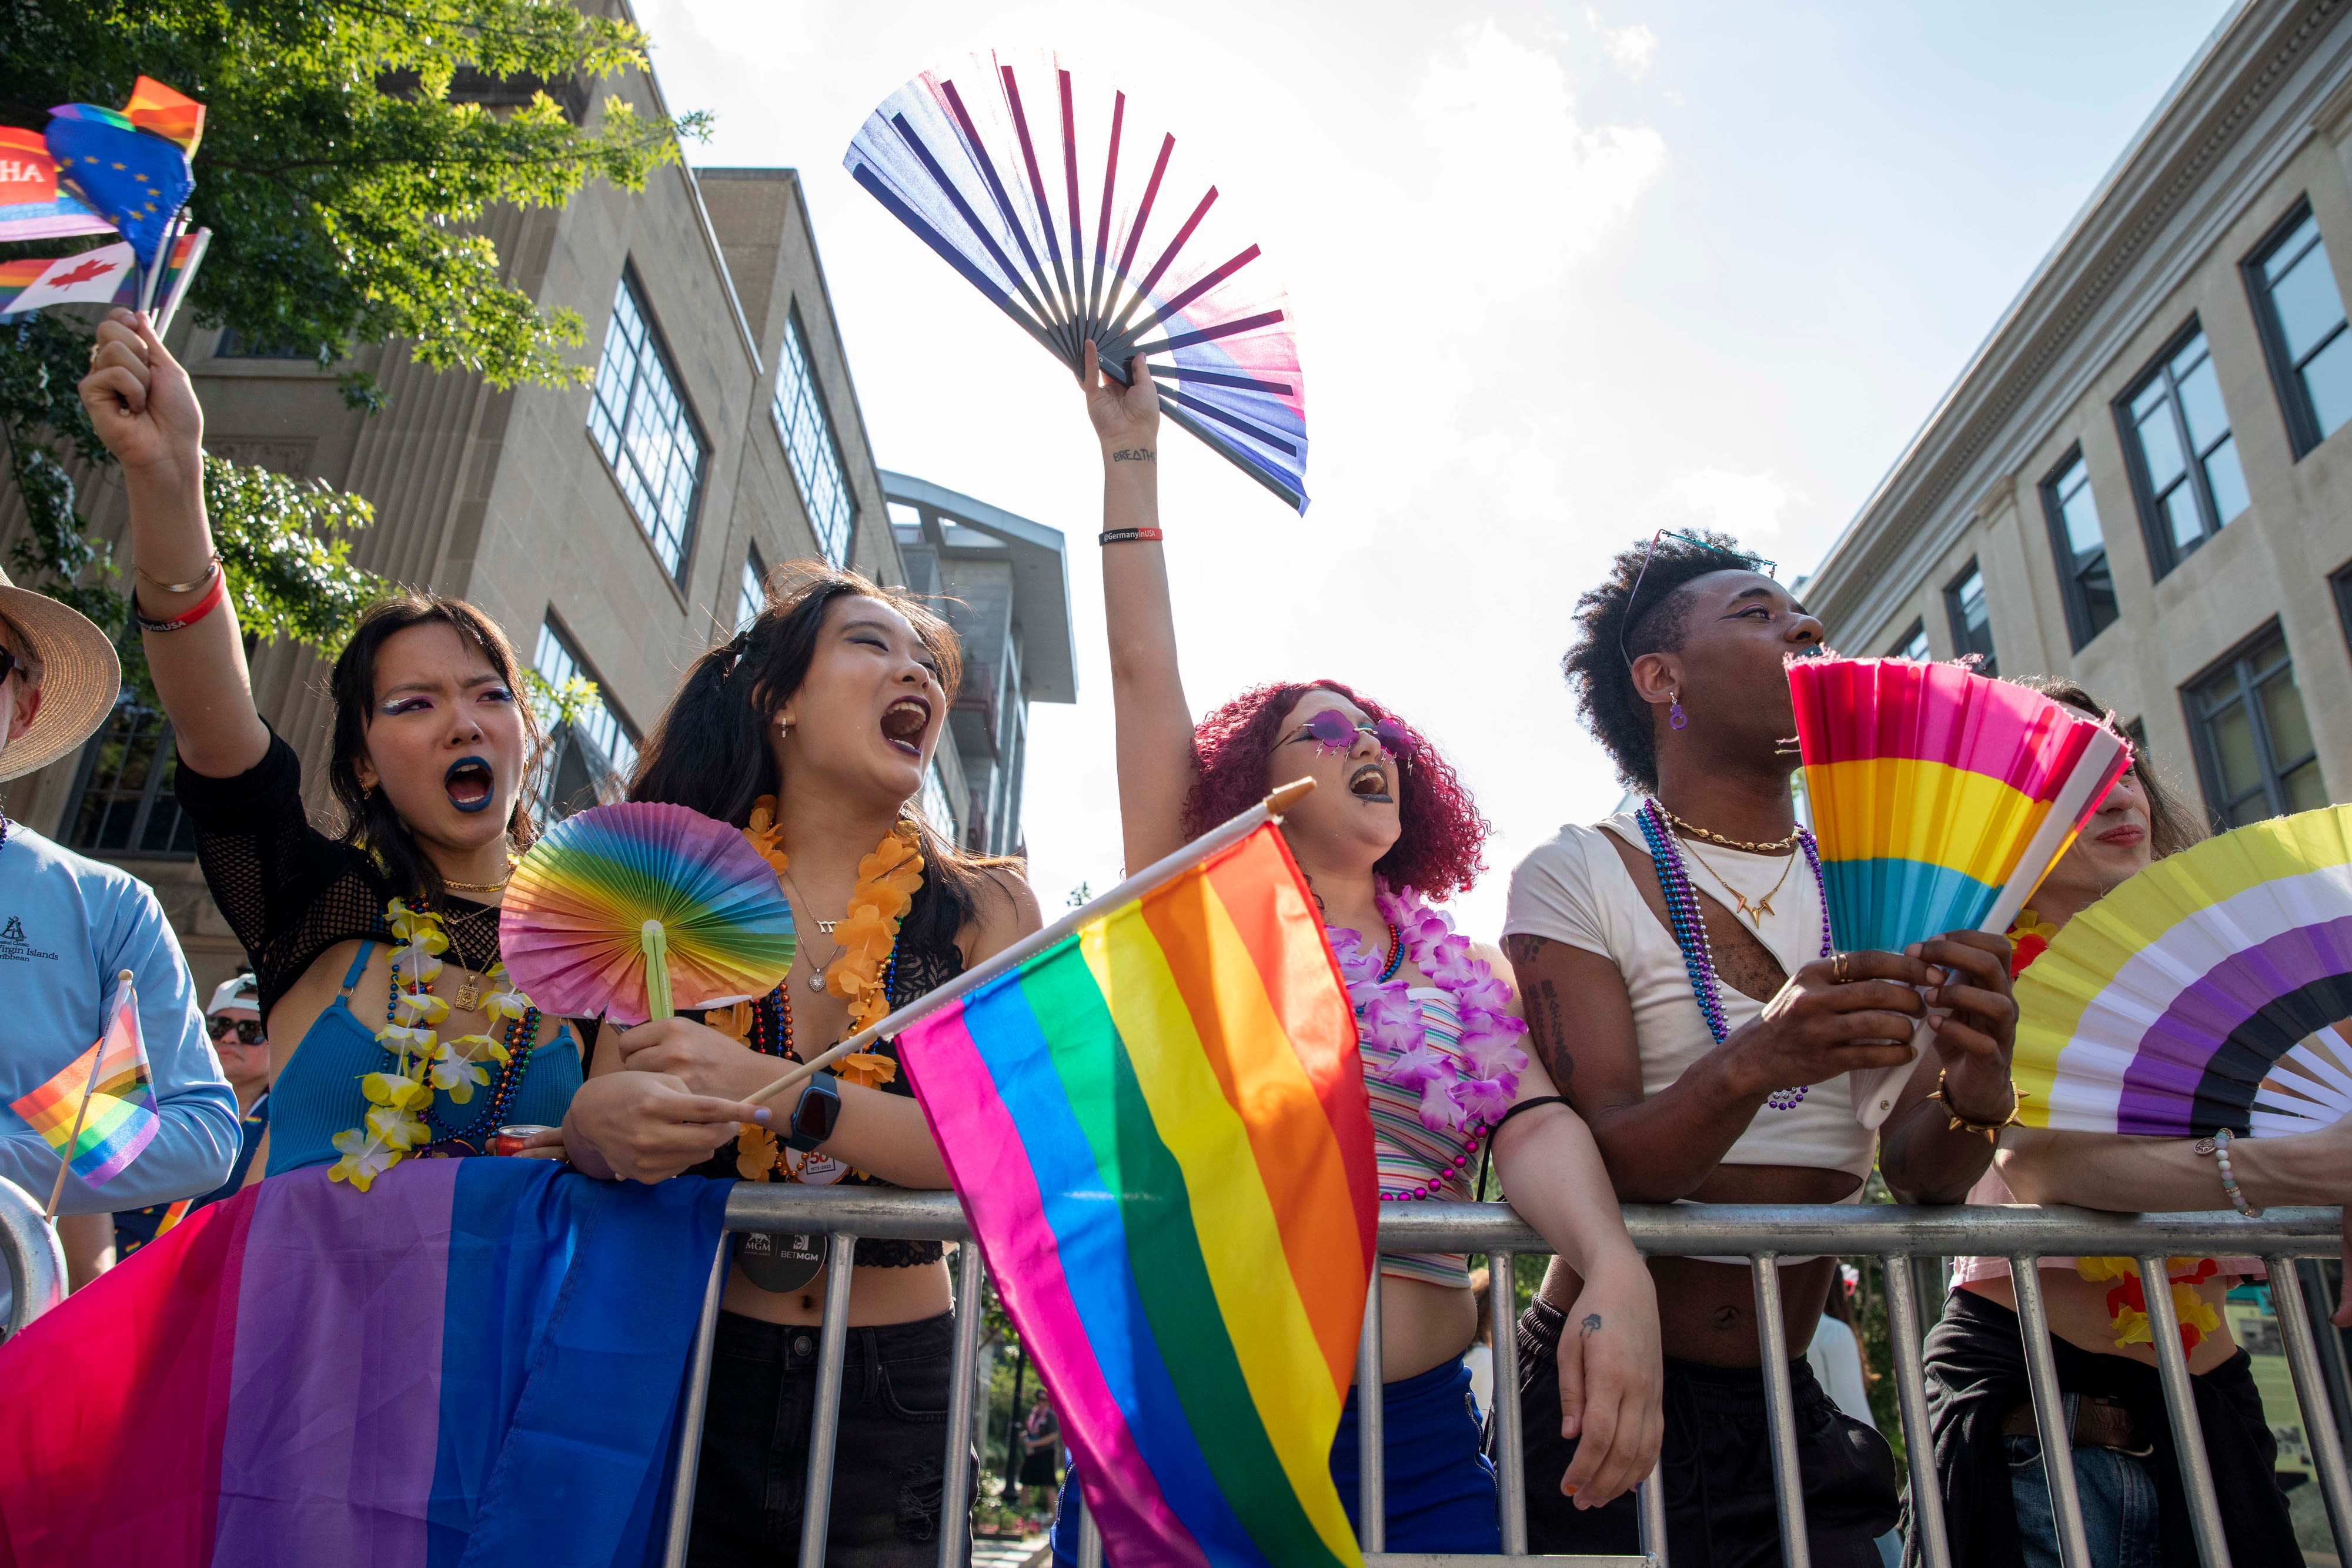 Everything you need to know about the Capital Pride Parade and events